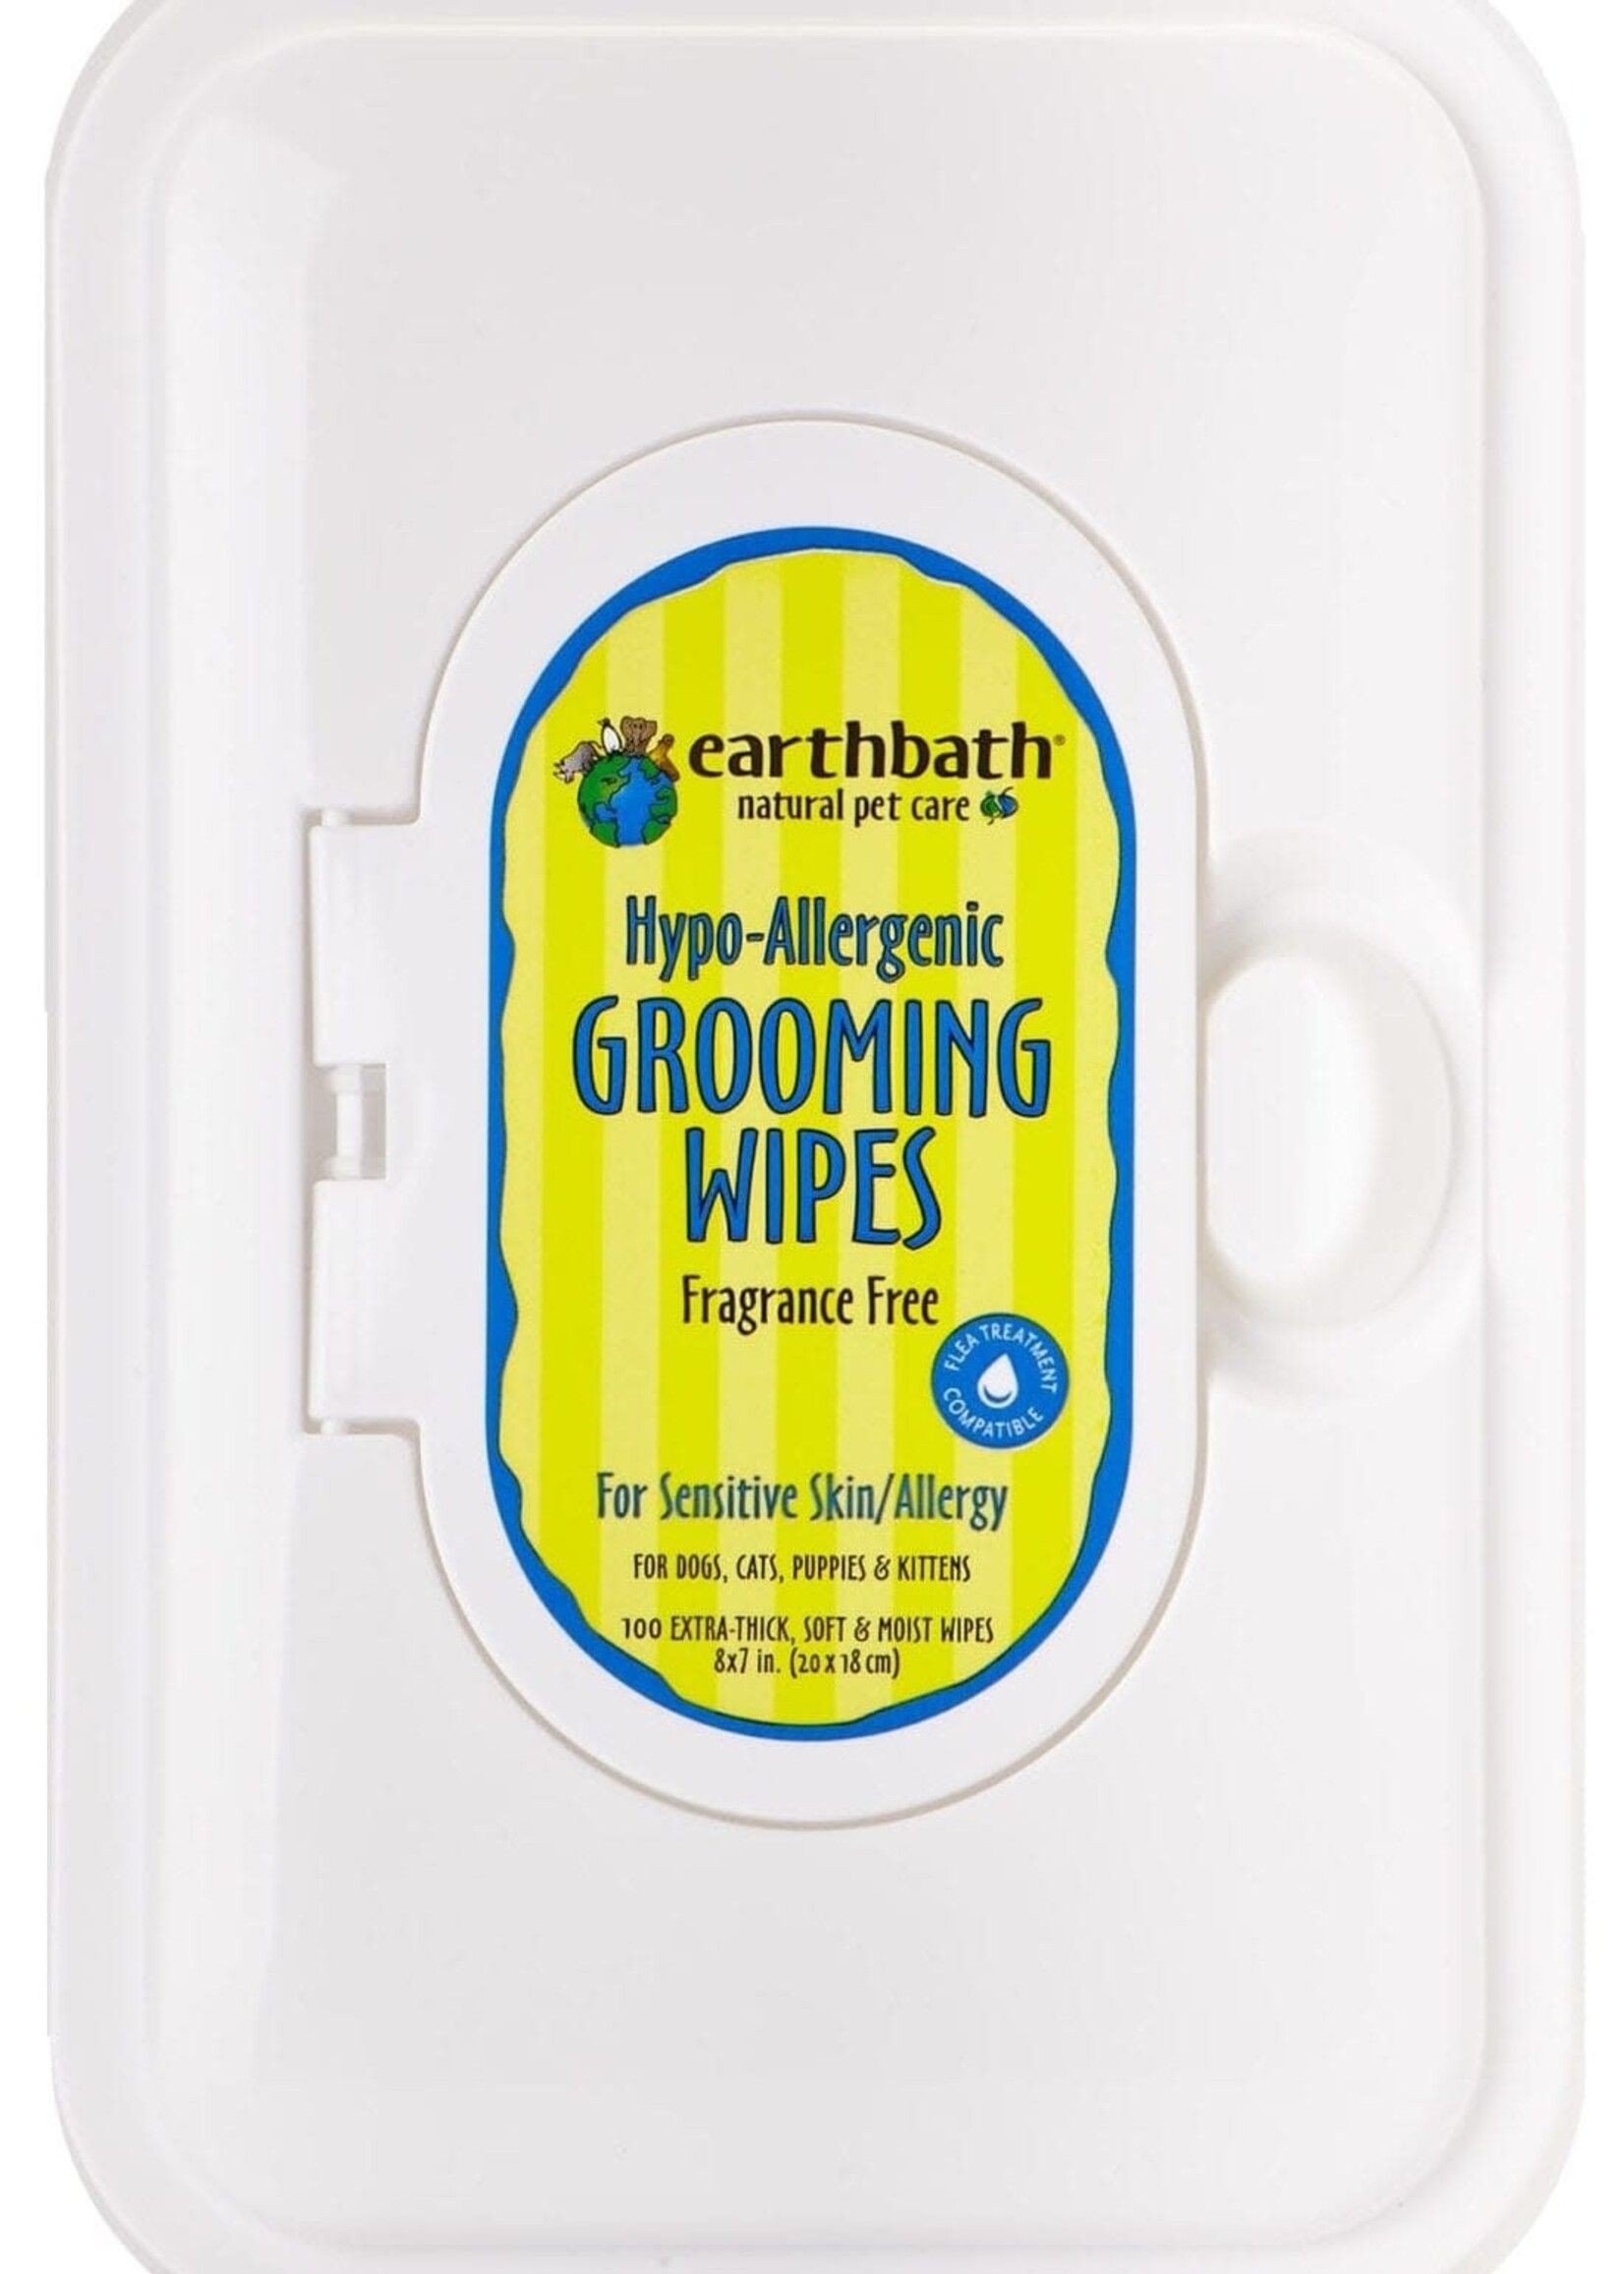 Earthbath Earthbath Hypo-Allergenic Grooming Wipes Fragrance-Free for Dogs & Cats (100 Count)